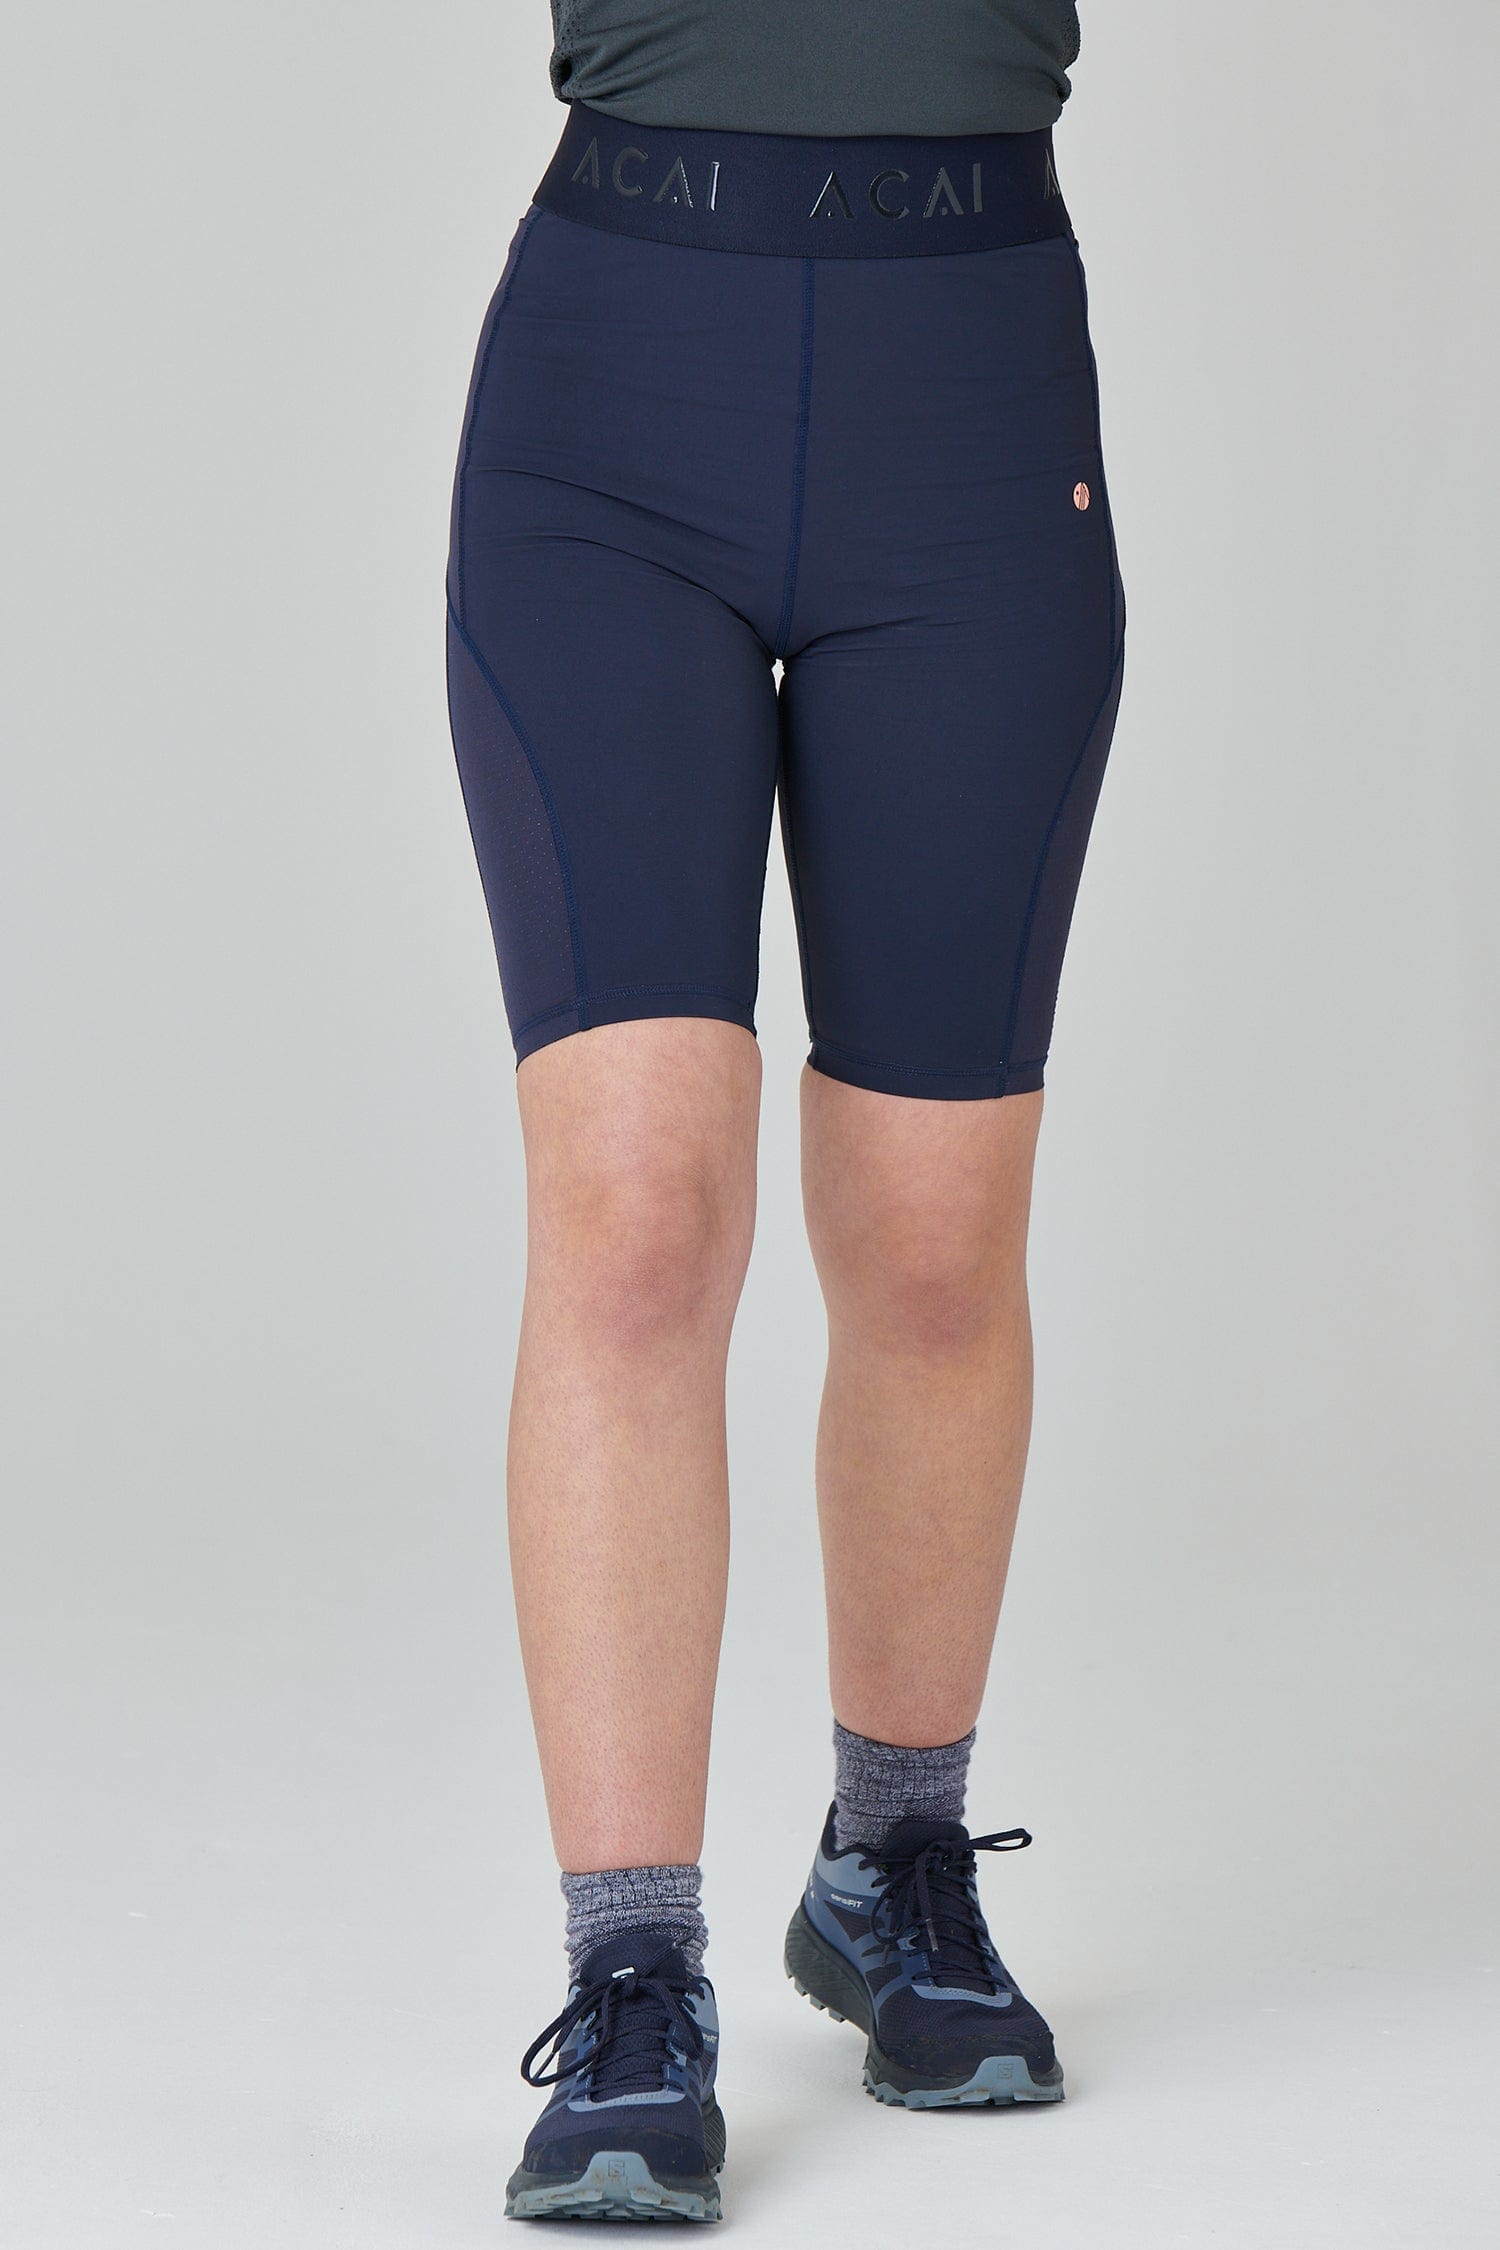 The Panelled Shorts- Midnight Blue - Large / Uk14 - Womens - Acai Outdoorwear